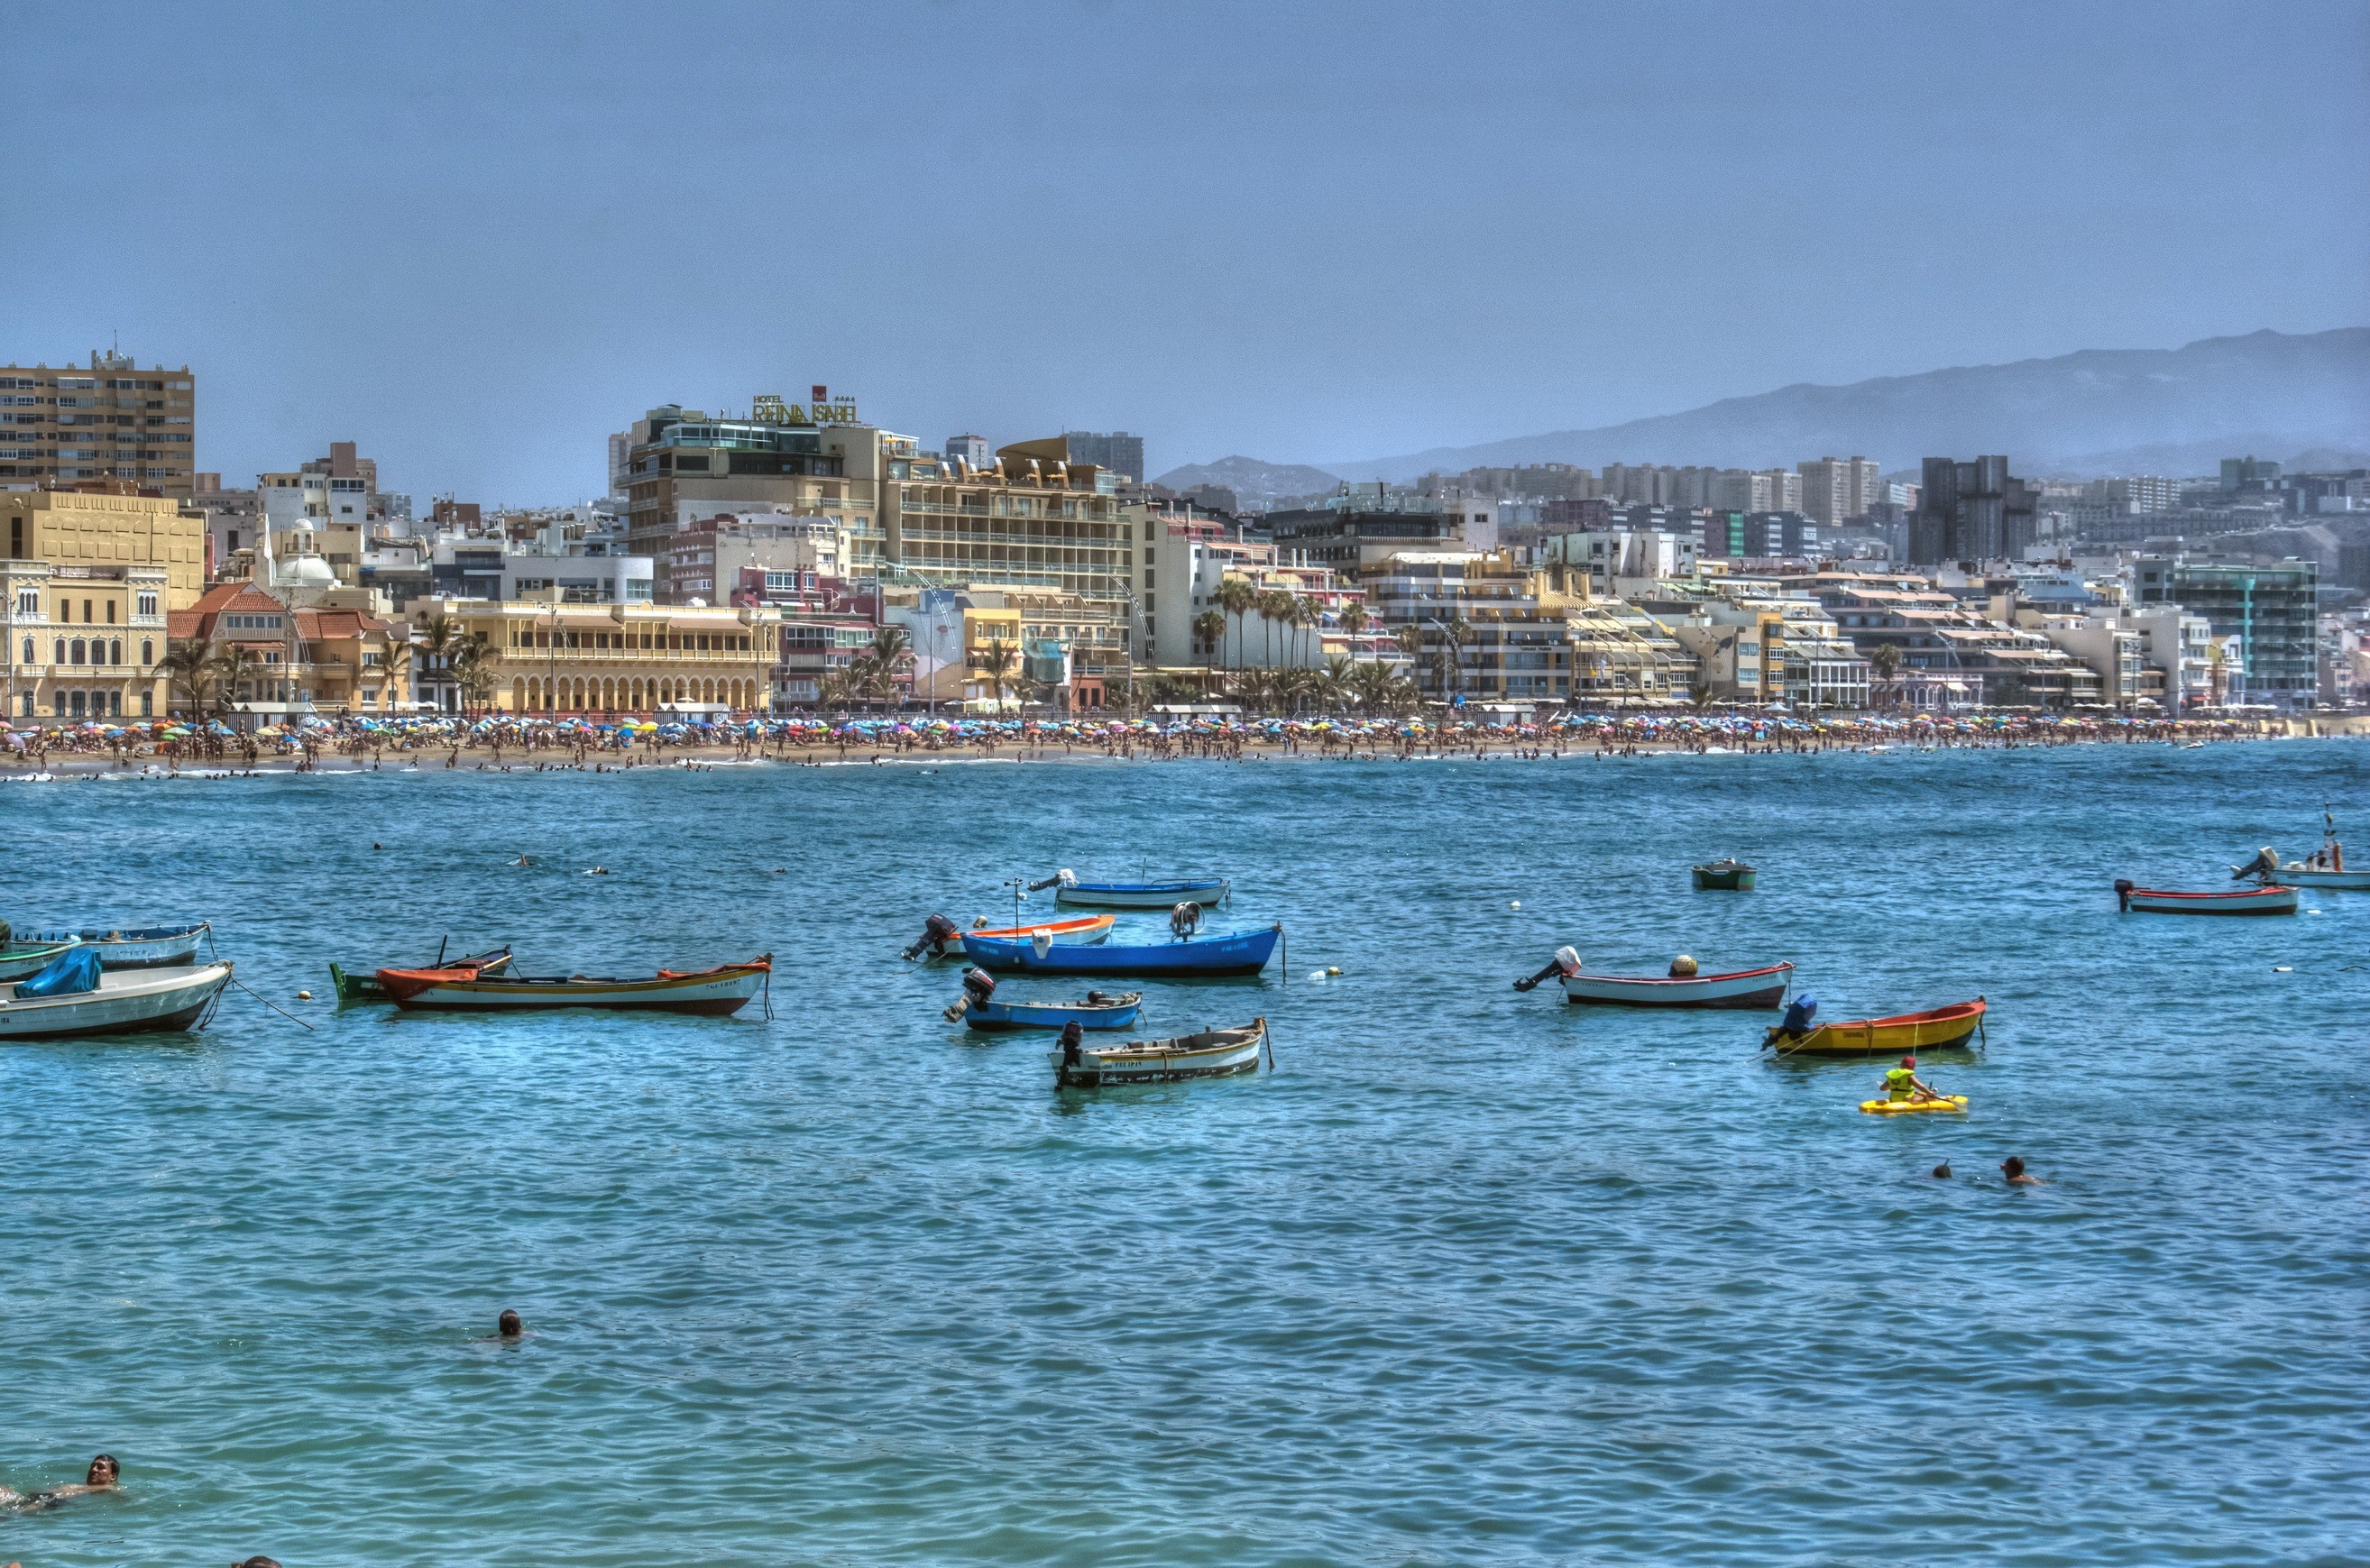 Las Palmas, the Canary Islands HD Wallpaper. Background Image